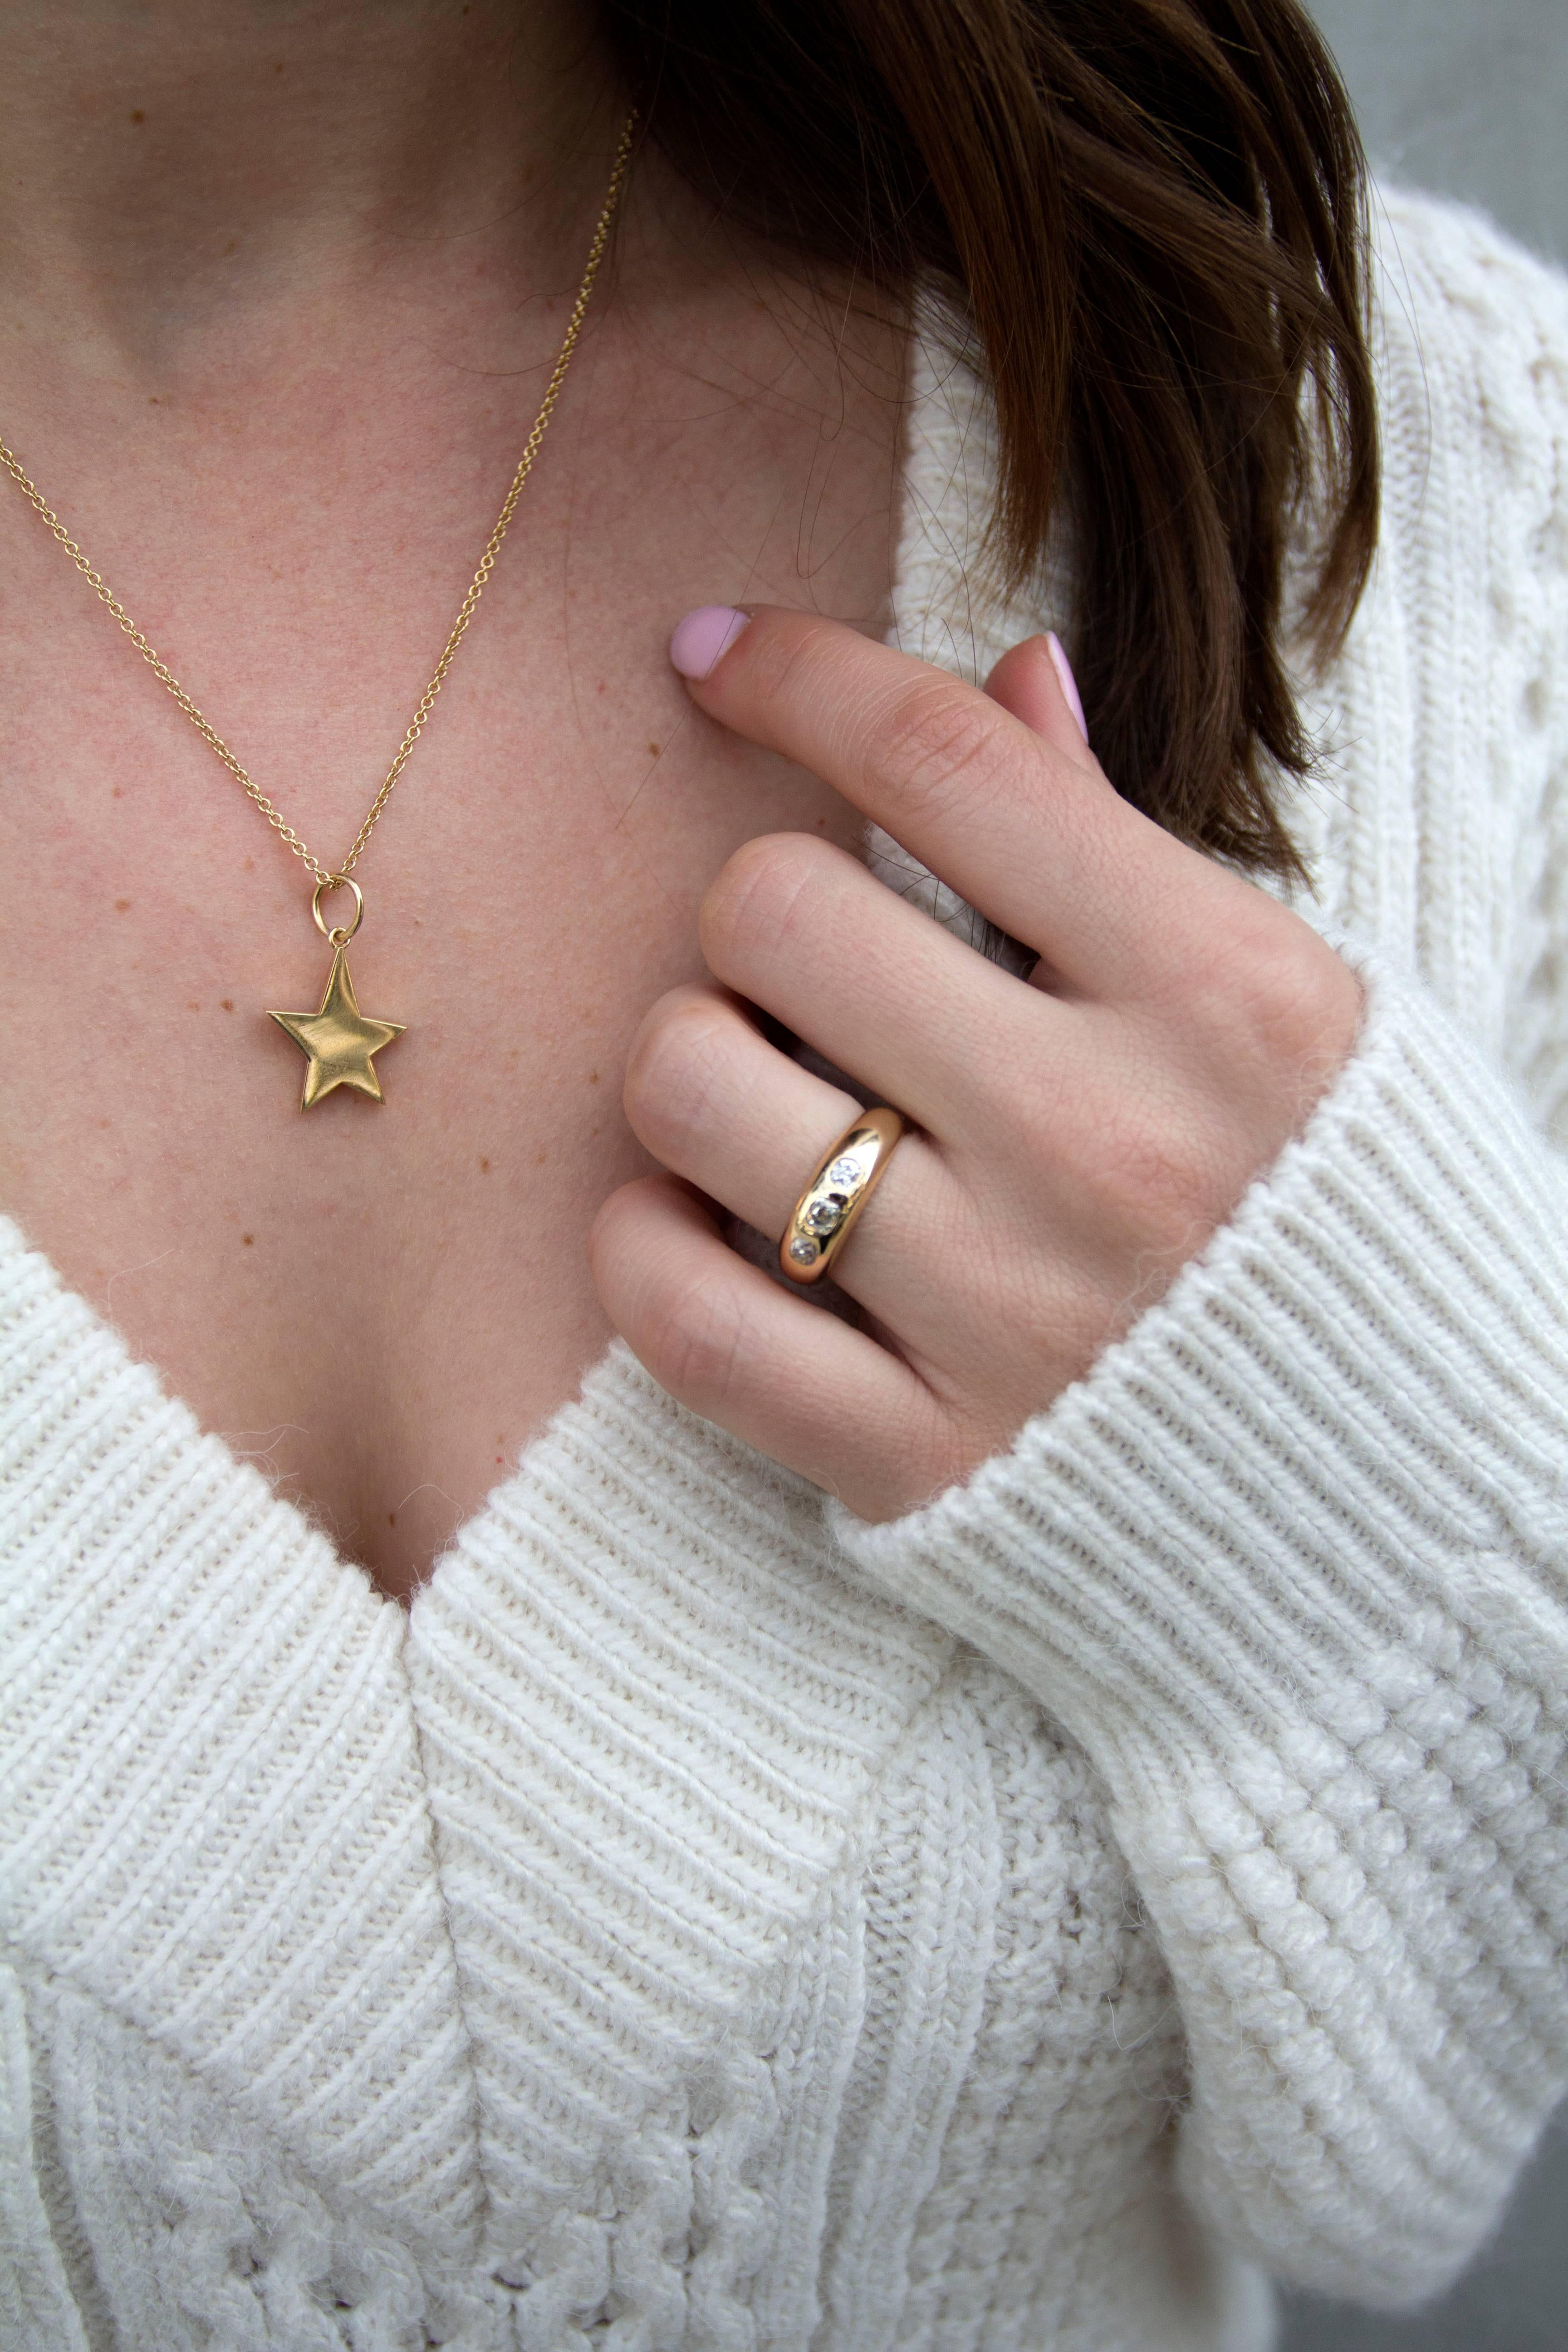 Handcrafted 18K Yellow Gold Star Charm on an 18